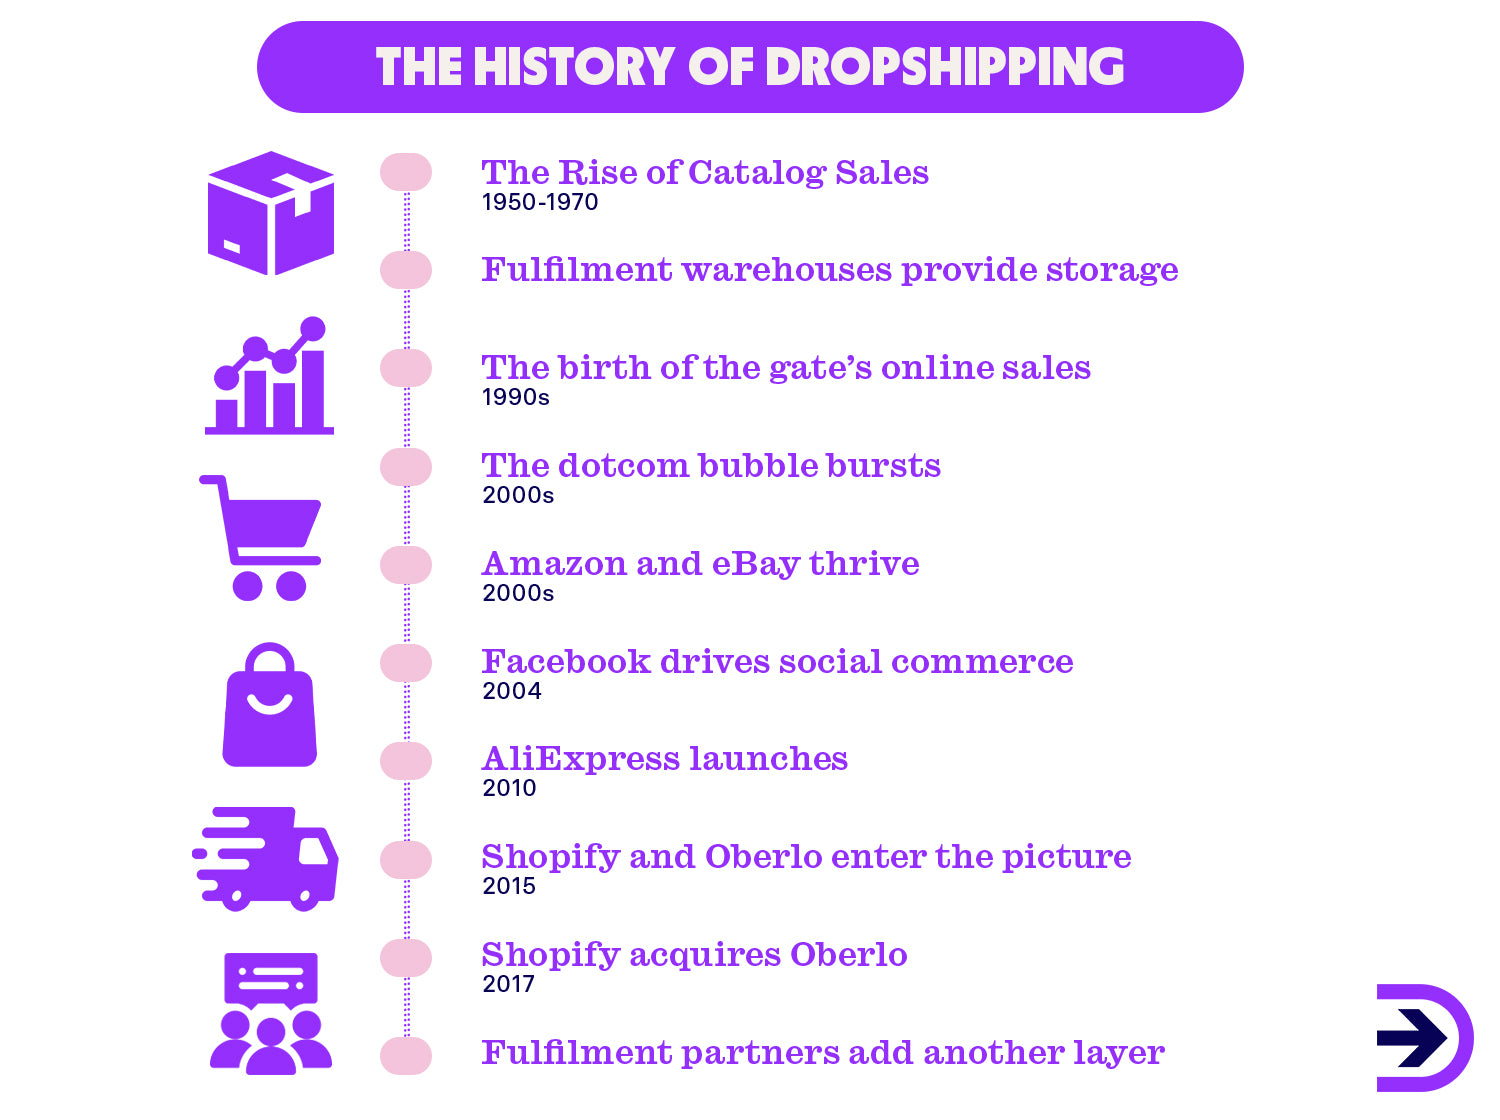 A flow chart from Do Dropshipping details the evolution of dropshipping from the 1950s to the present day.